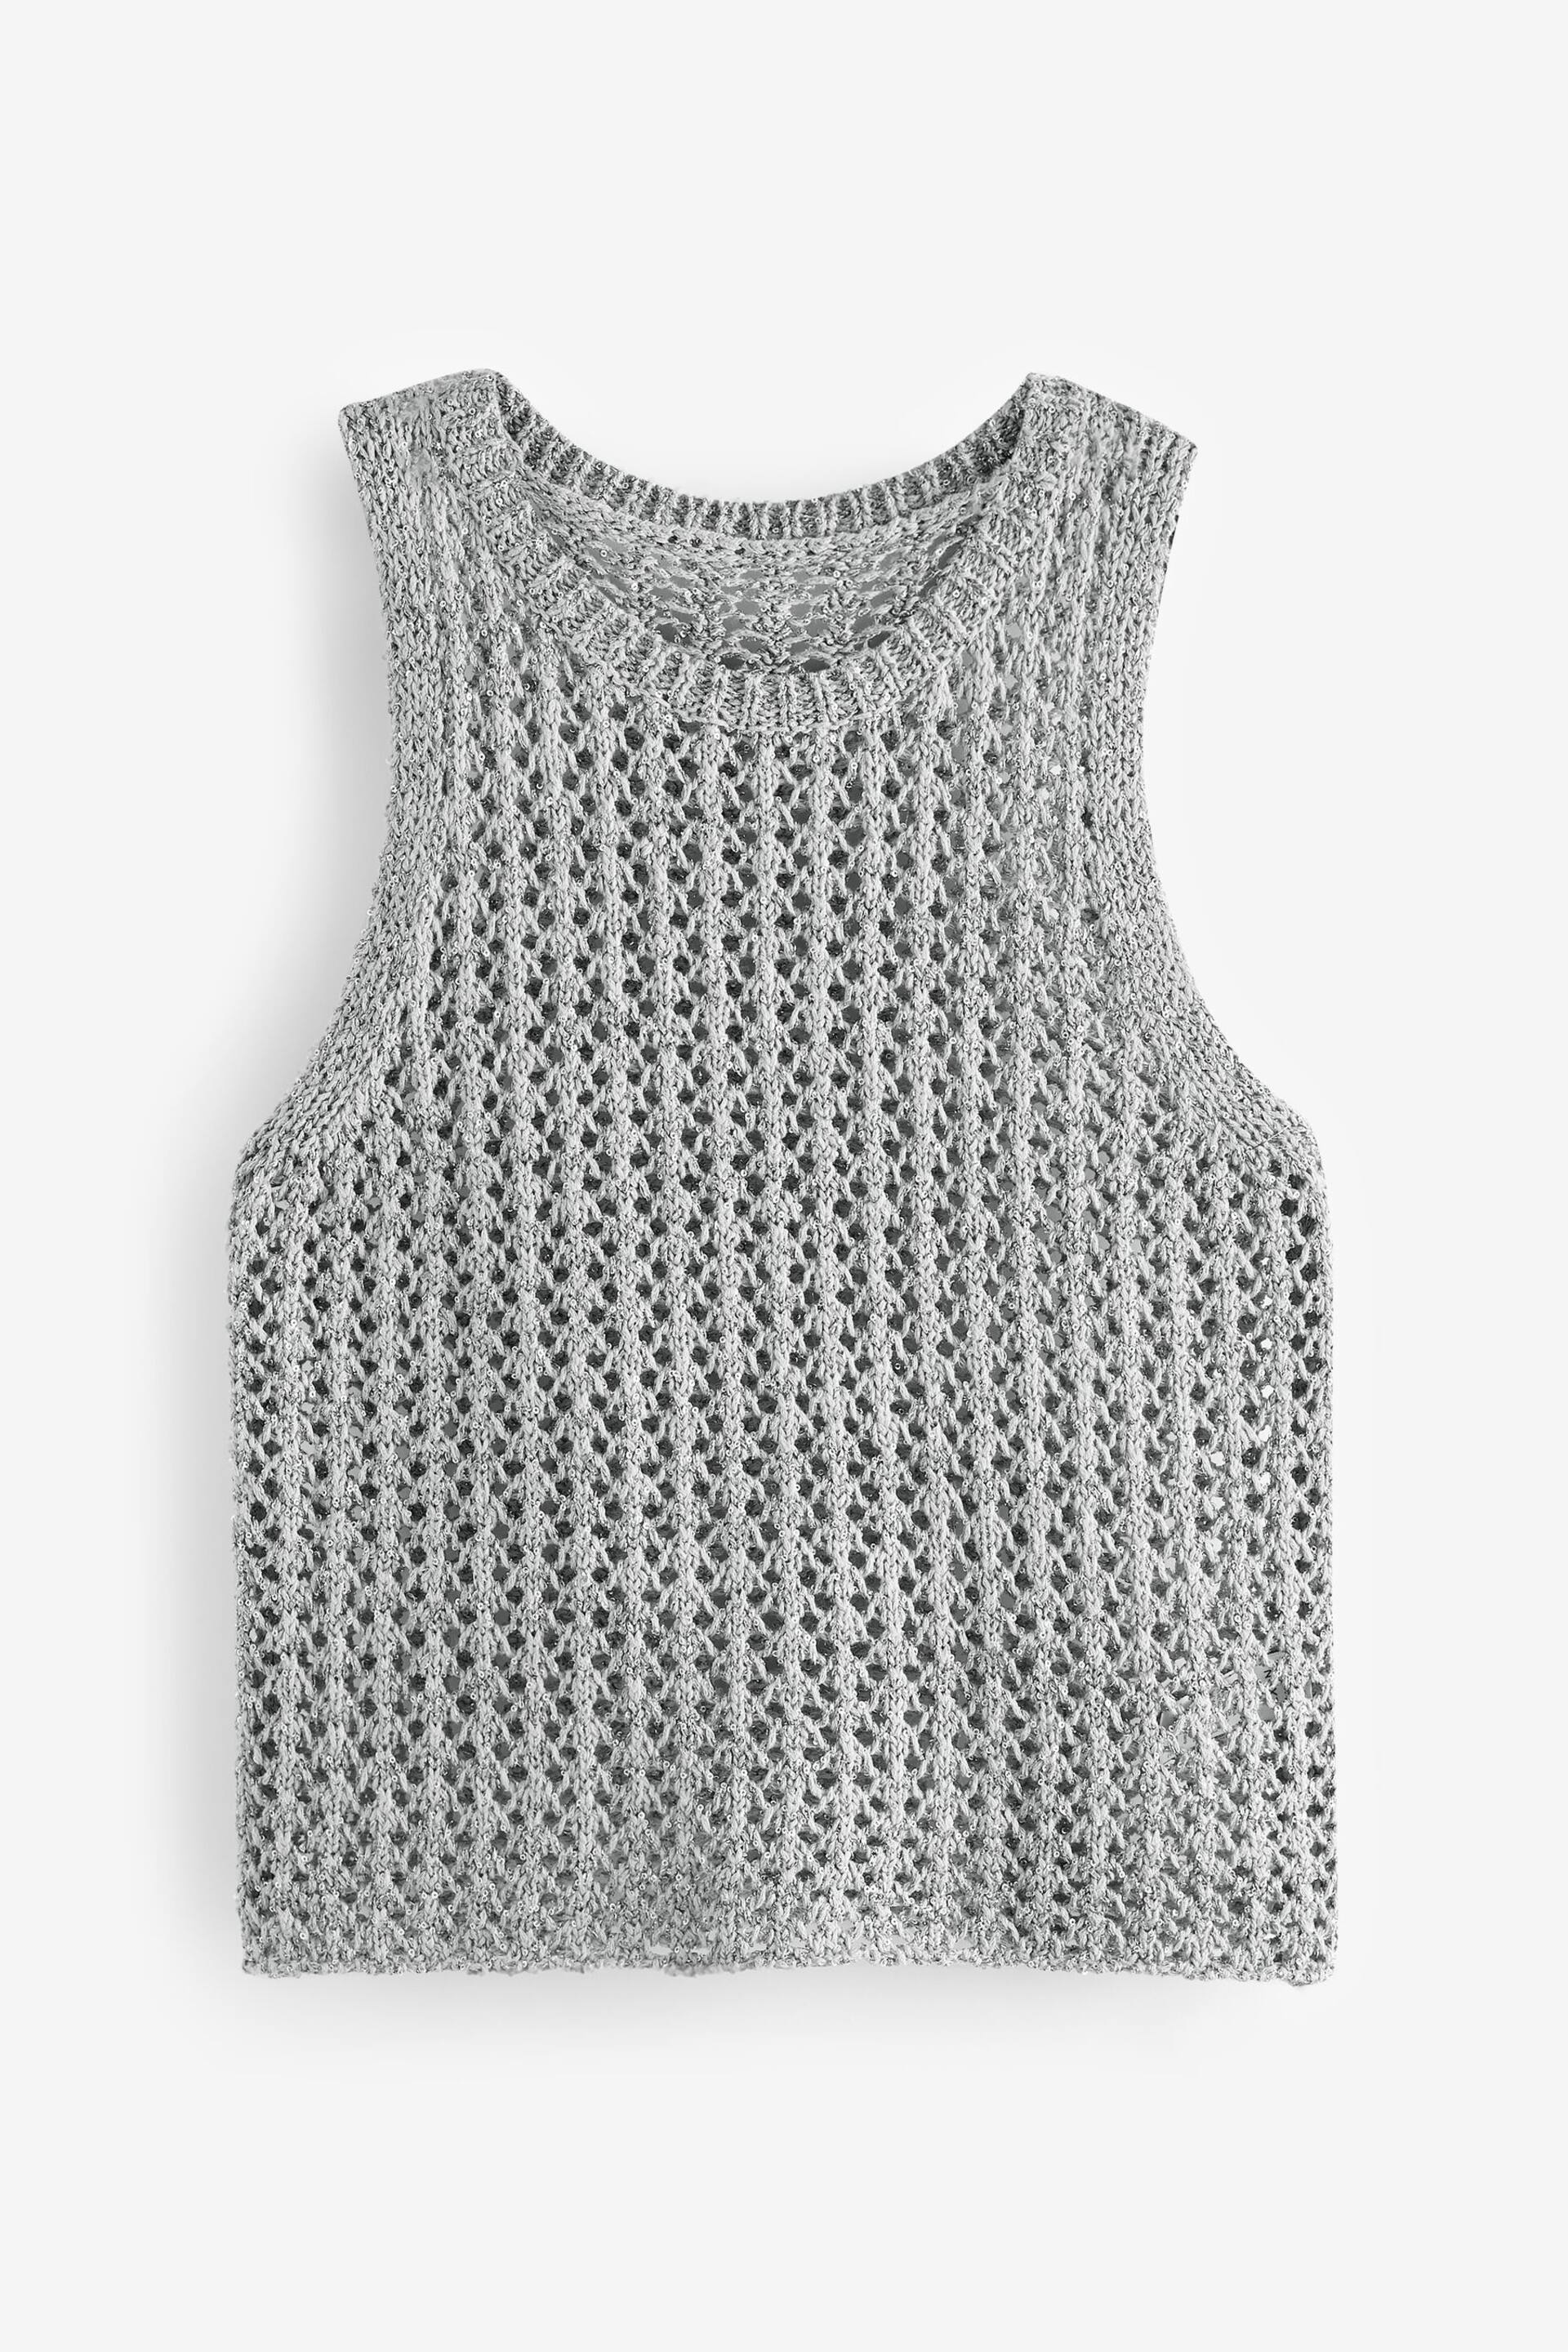 Grey Knitted Sequin Tank - Image 6 of 7